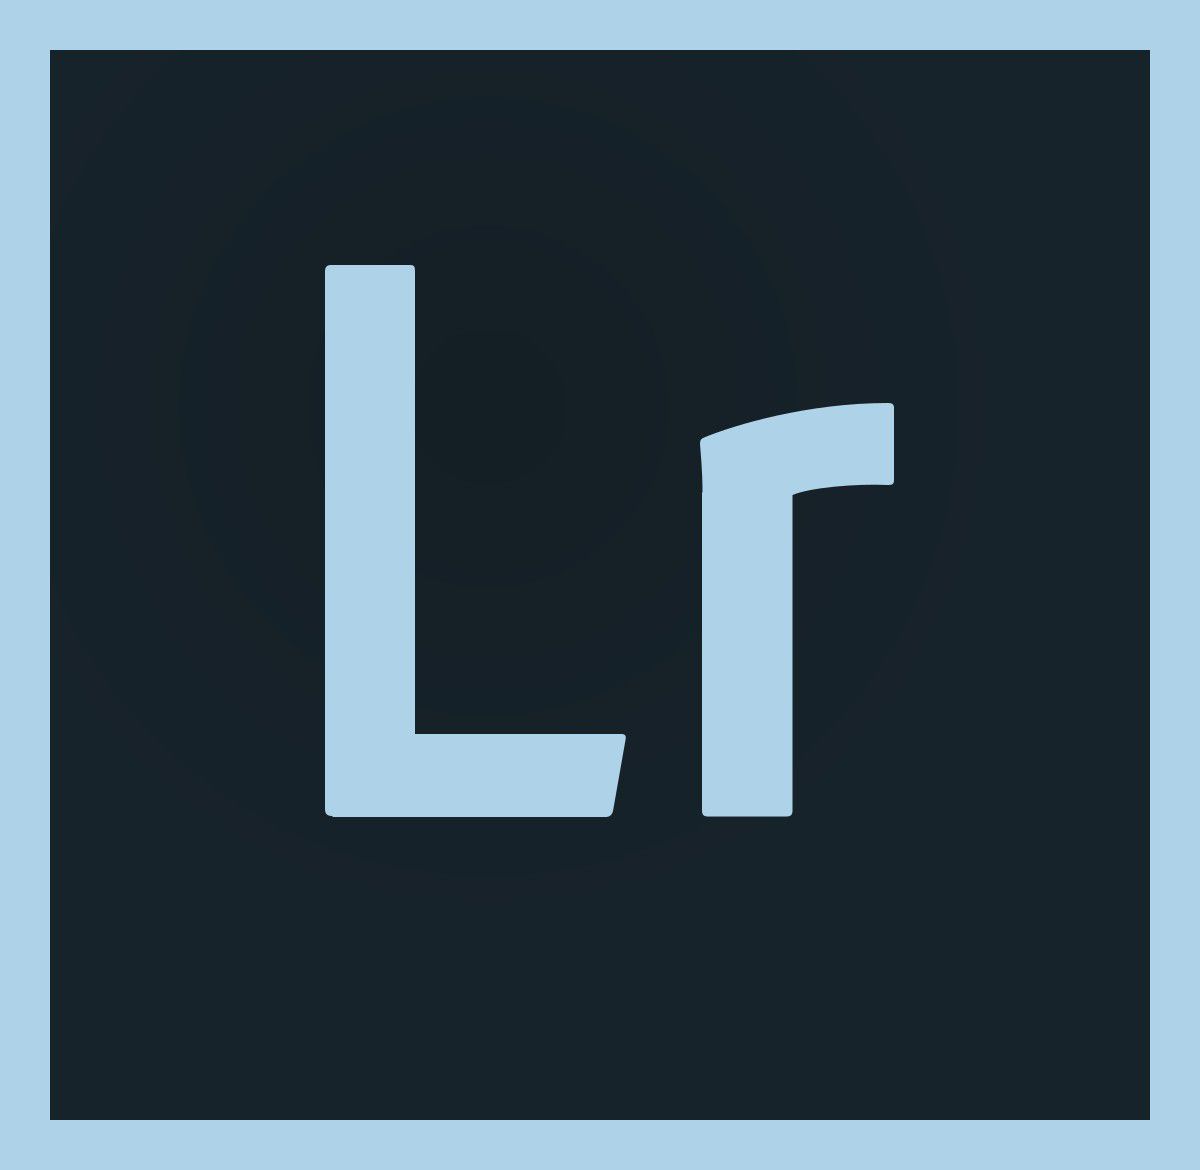 Adobe Lightroom (2019) (Permanent License) No More Subsription Fees.(Tangible Item)